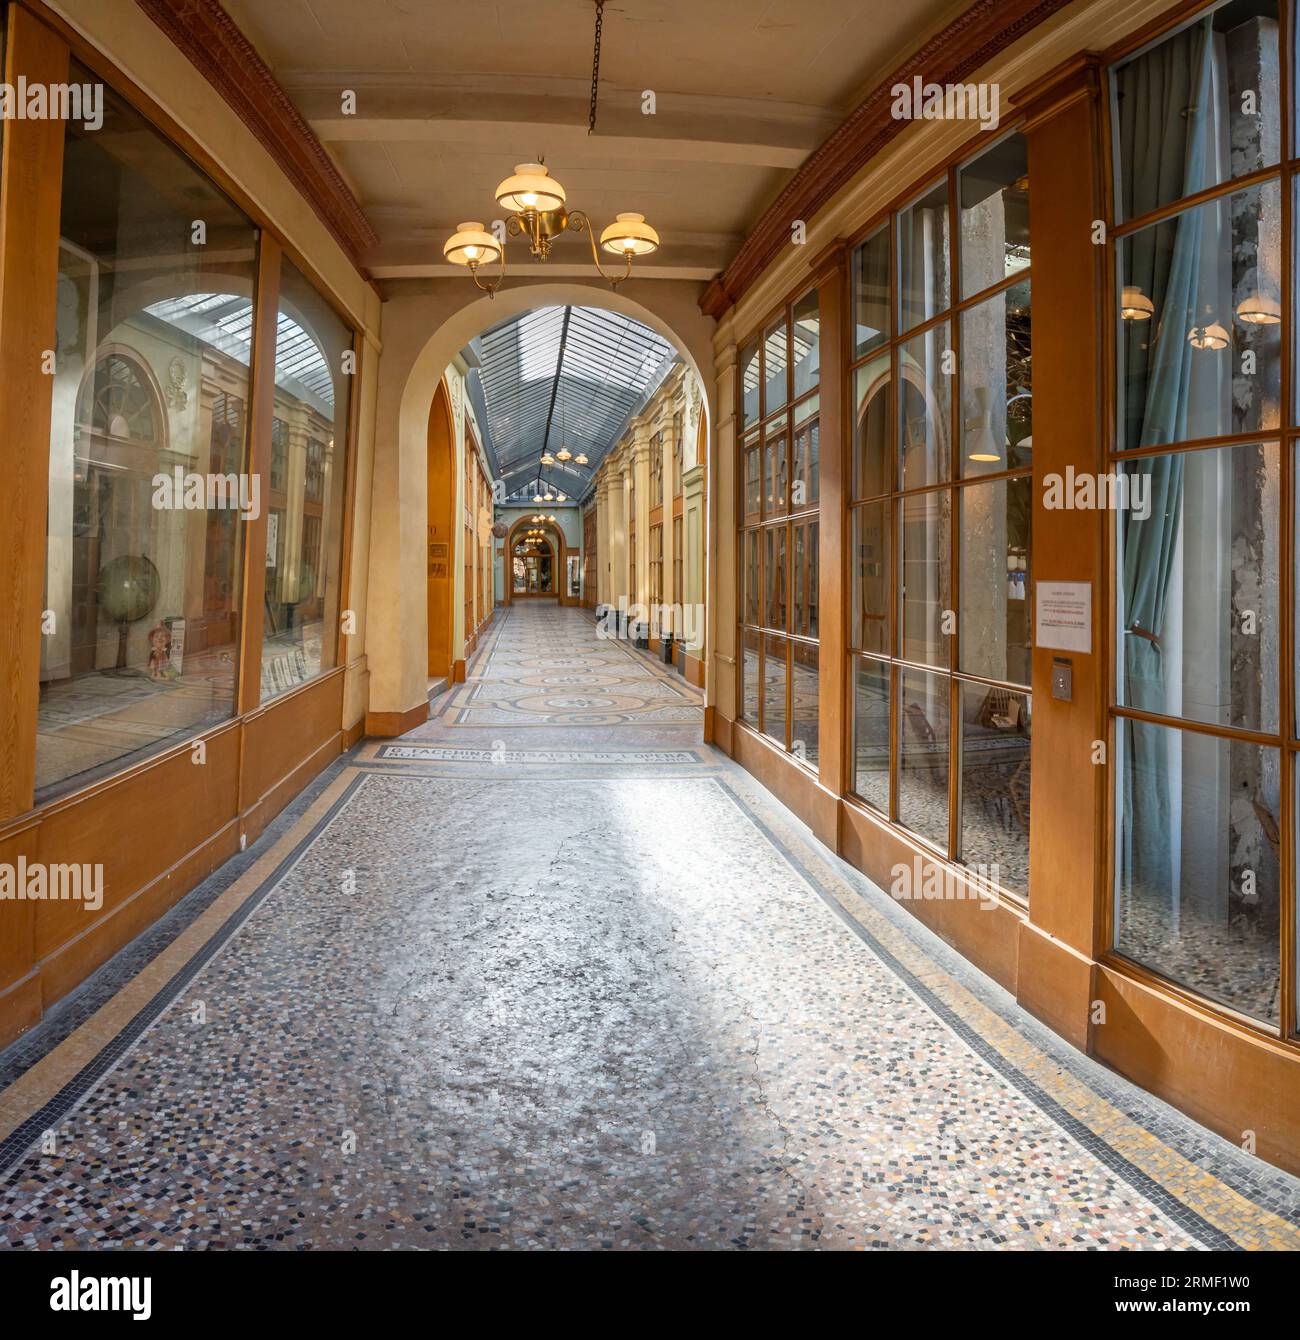 Paris, France - 08 26 2023: Vivienne passage. View of an alley from the passage with mosaics on the floor Stock Photo